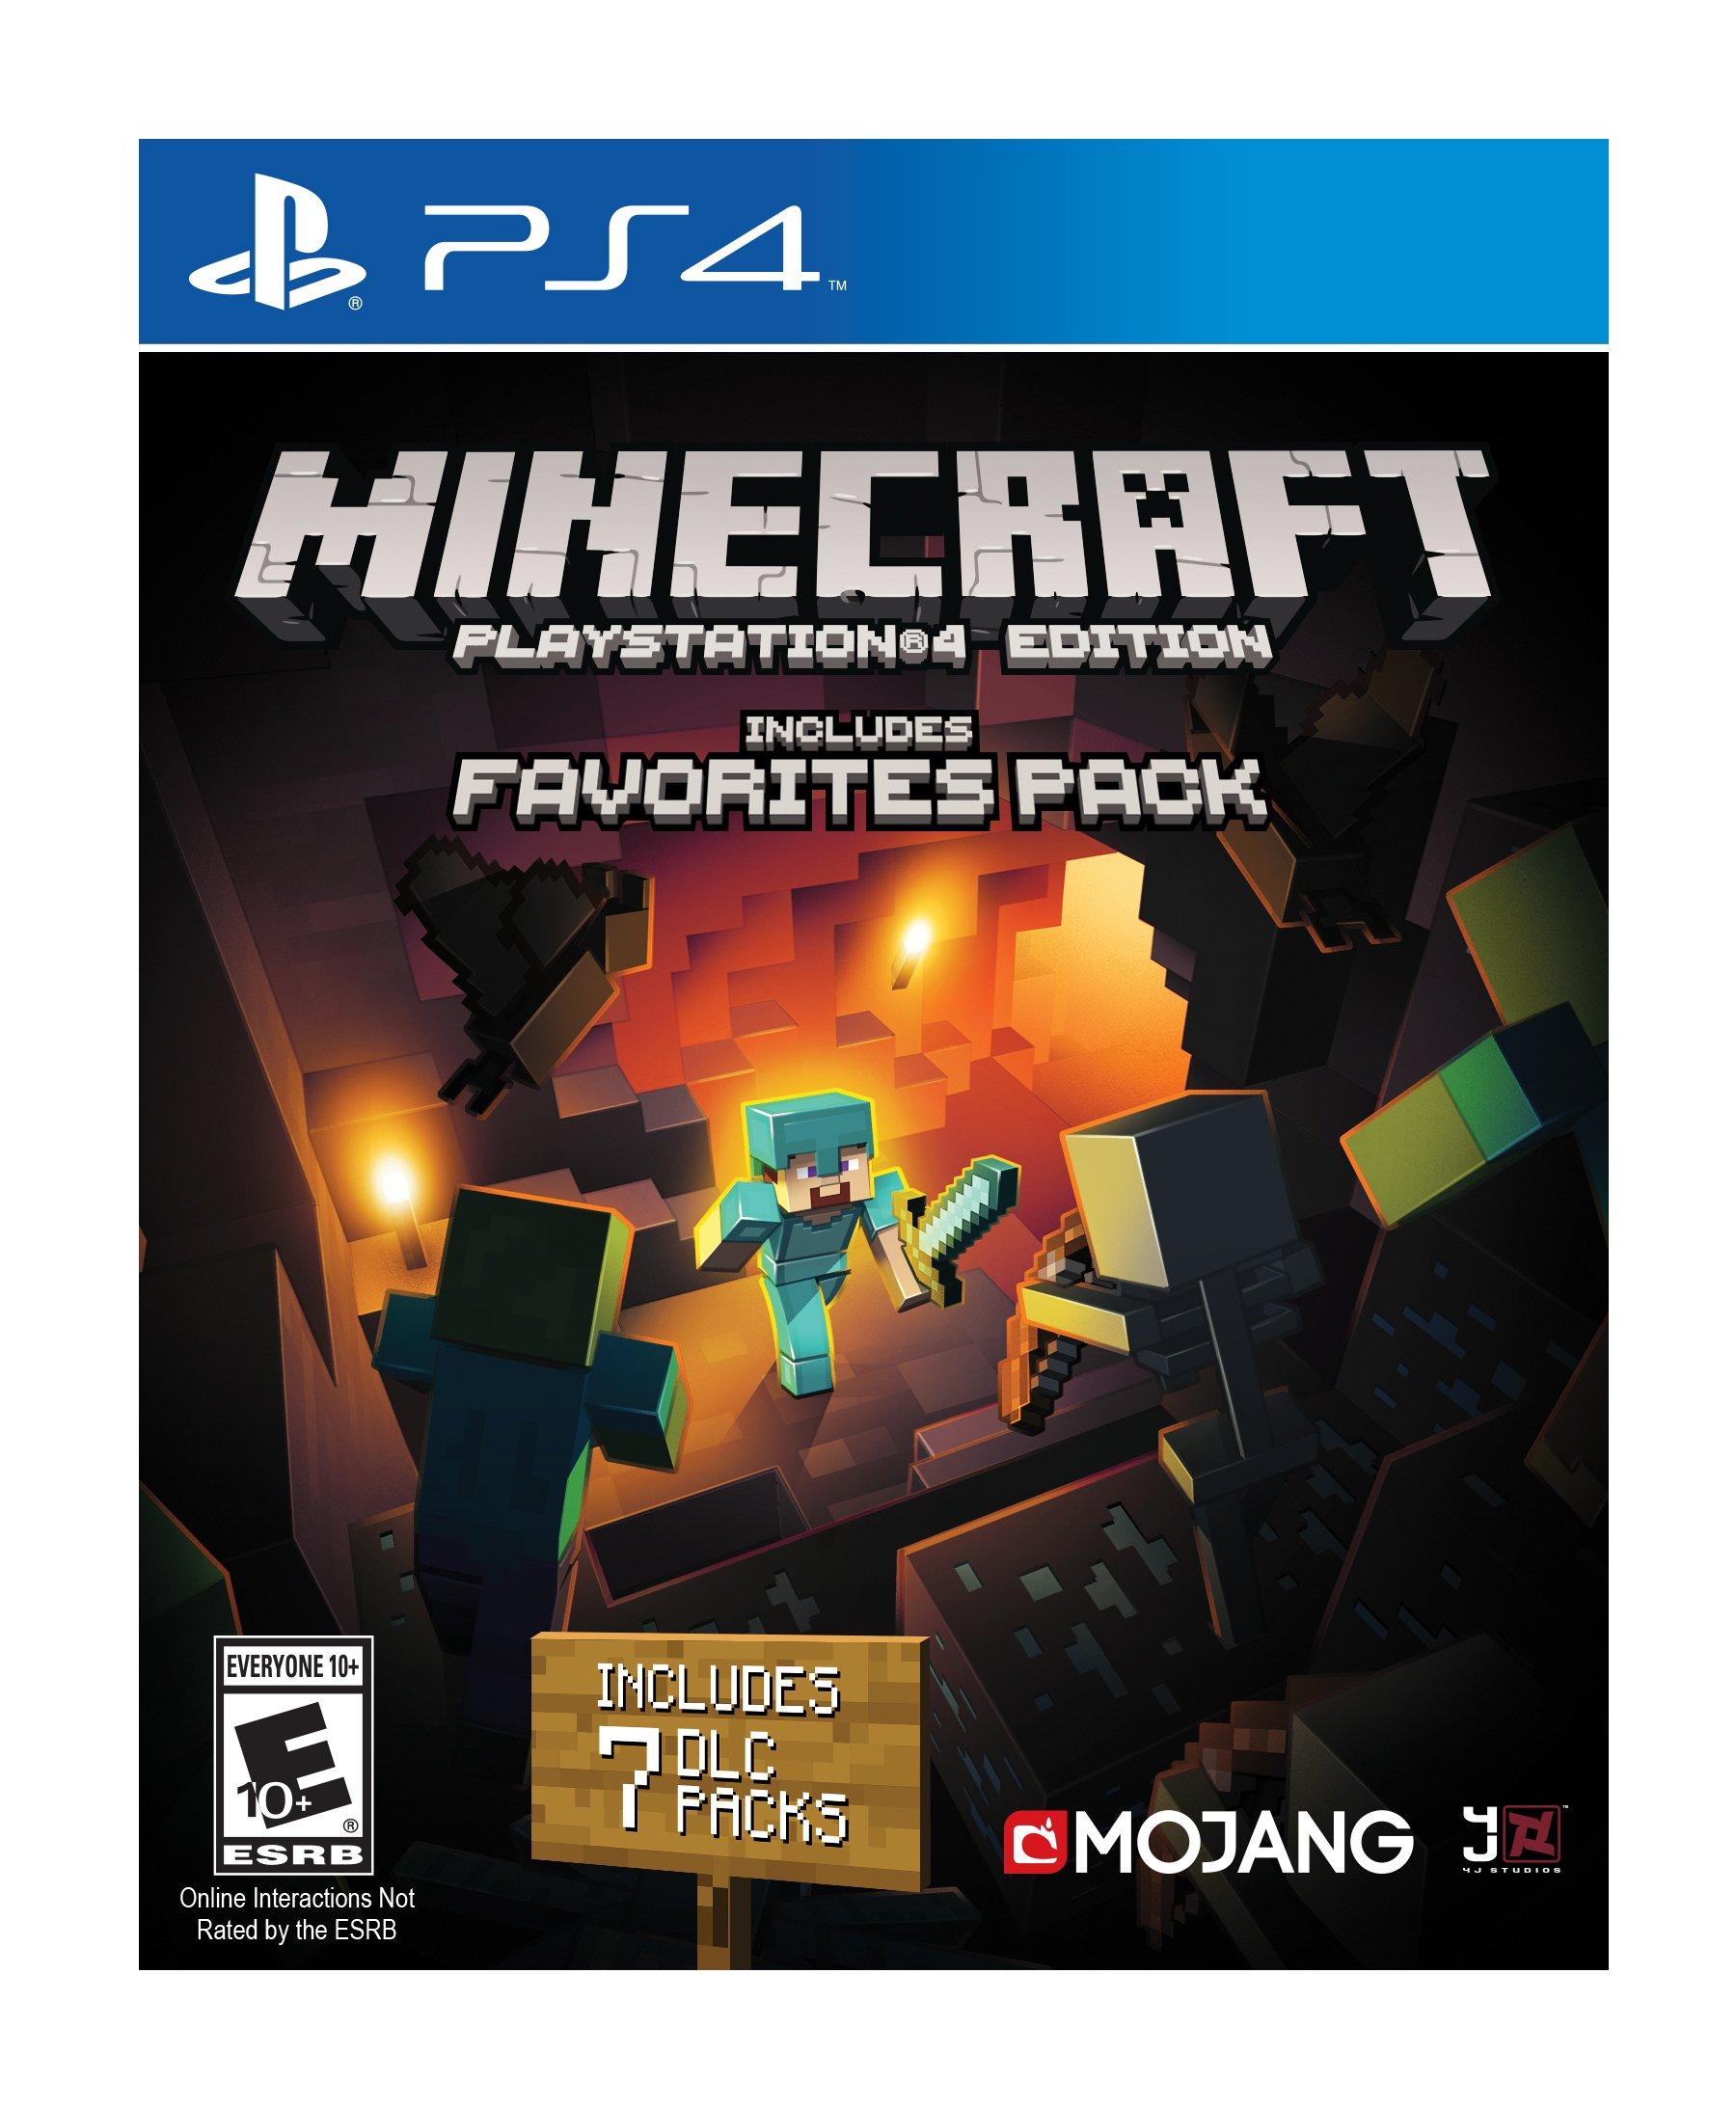 new minecraft ps4 game